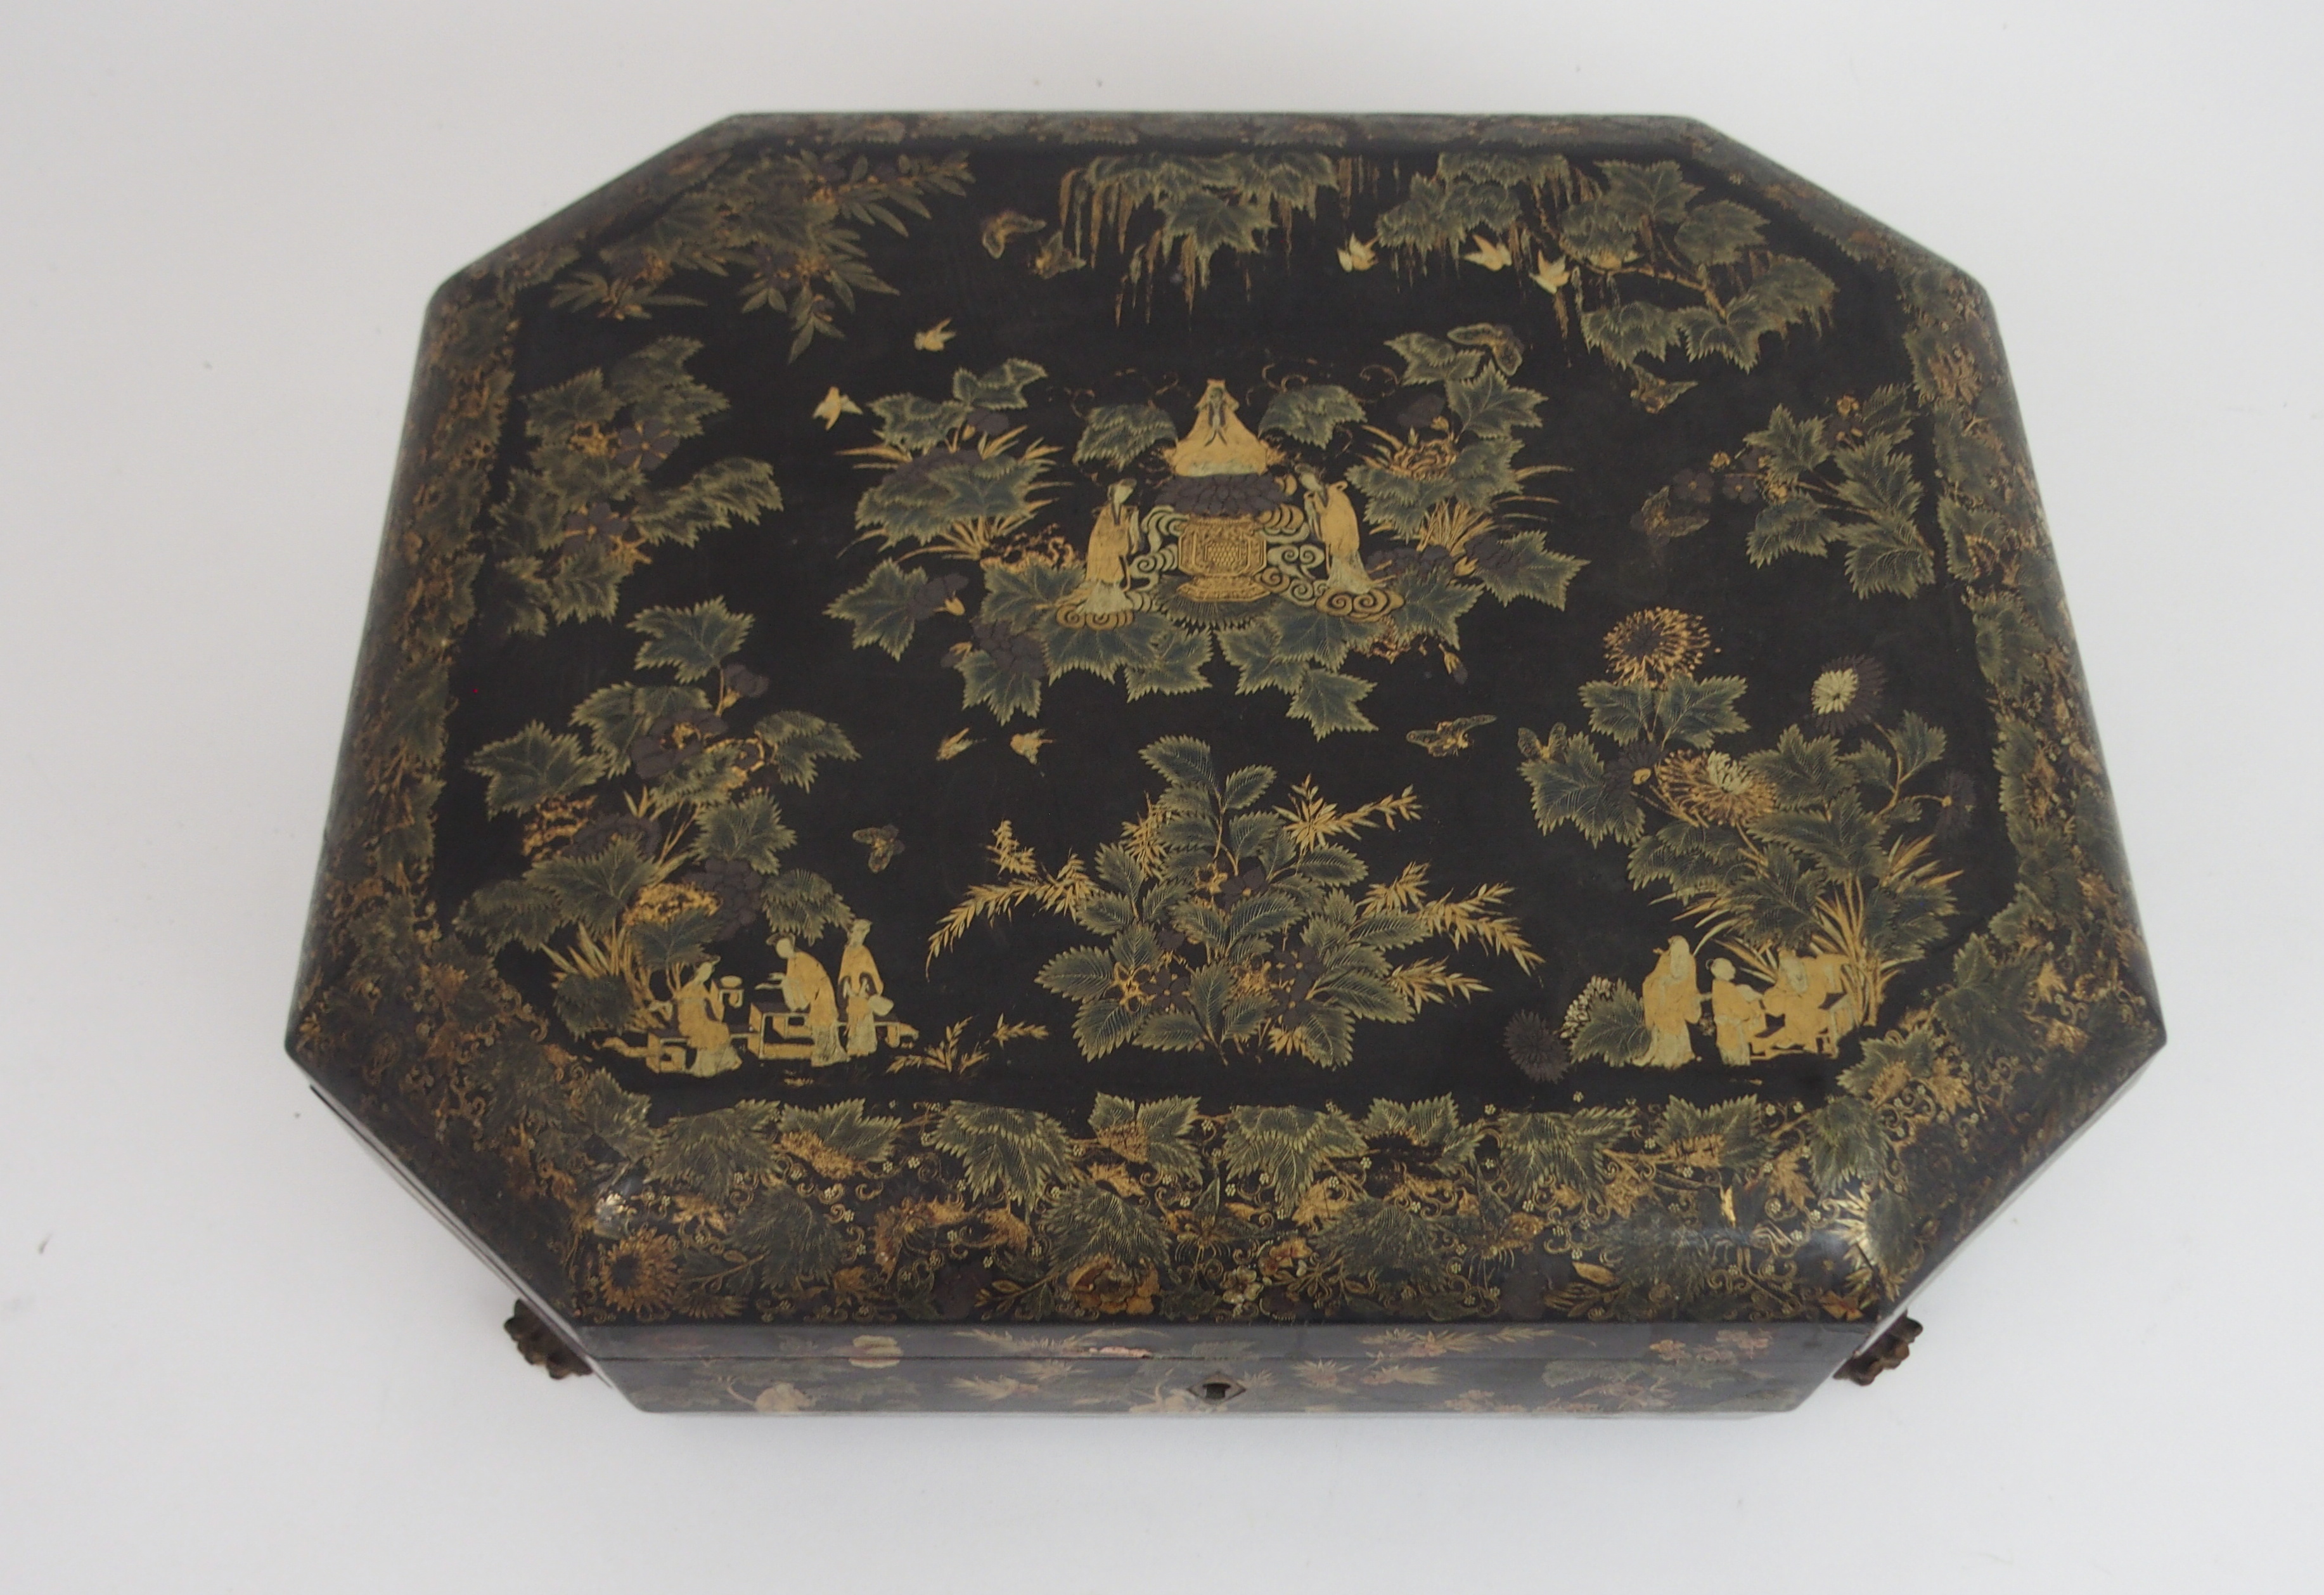 A CANTONESE BLACK AND GOLD LAQUERED SEWING BOX painted in gilts with immortals and figures beneath - Image 4 of 10